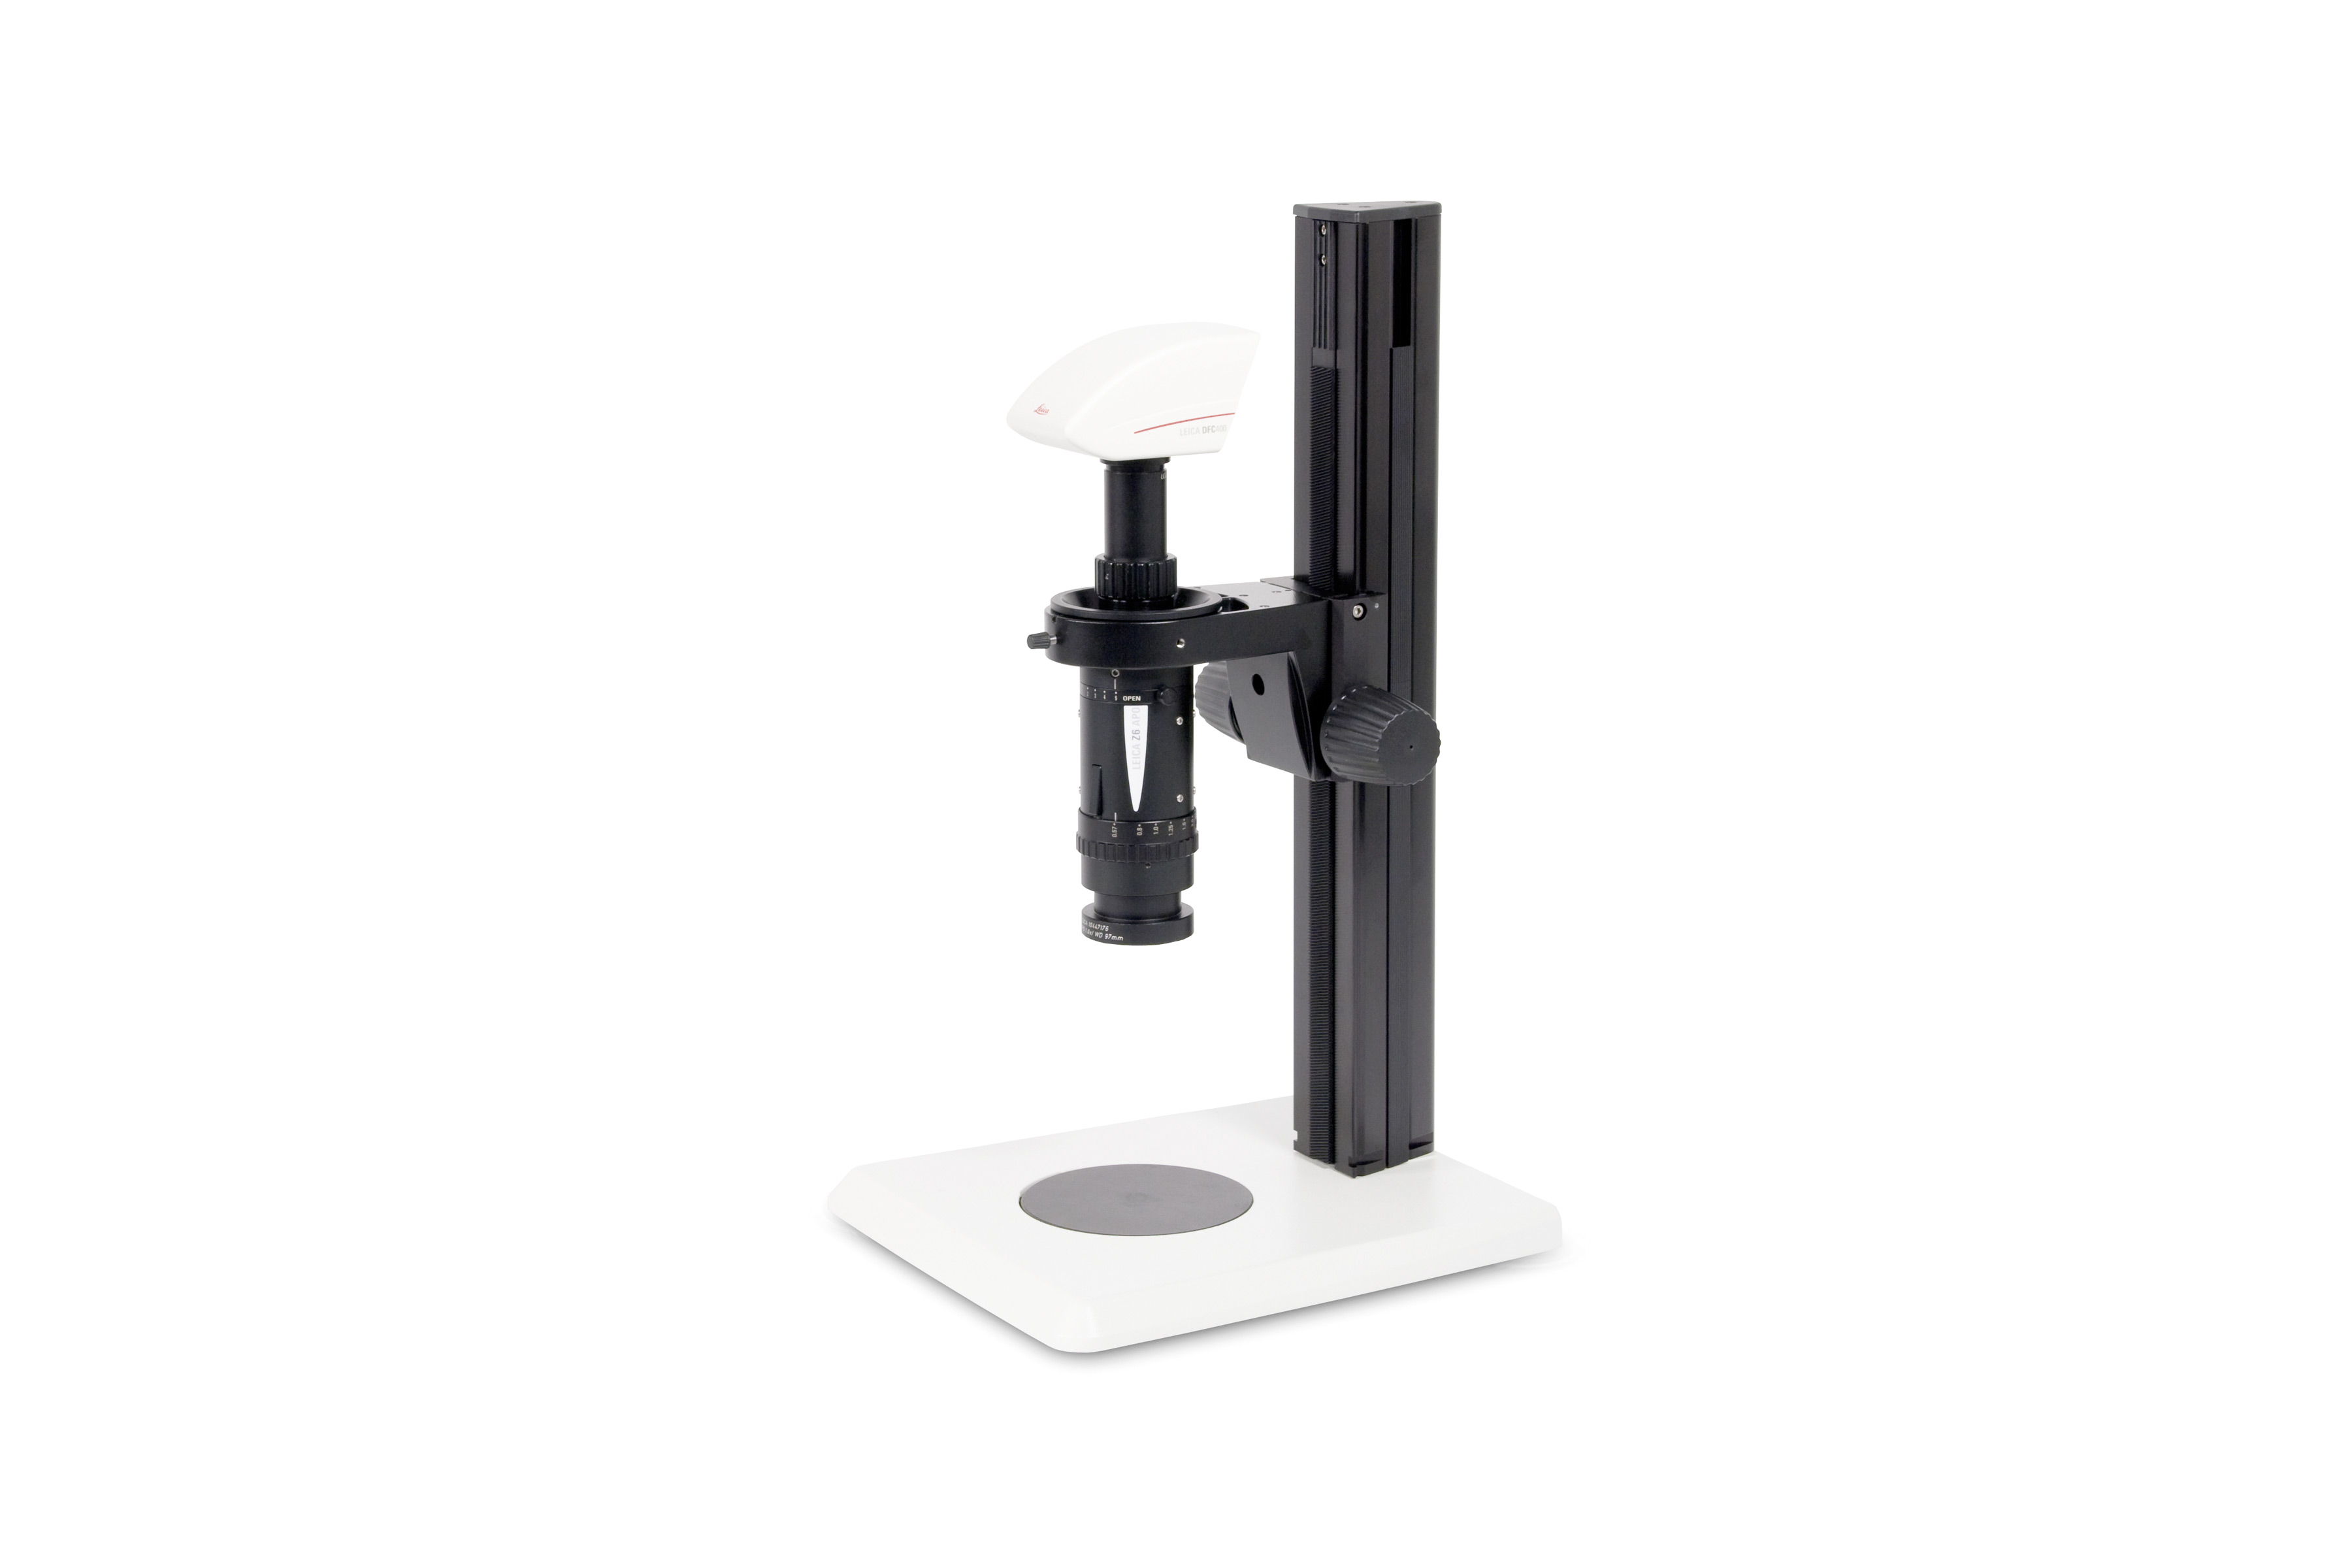 Large working distance allows convenient analysis of any sample.